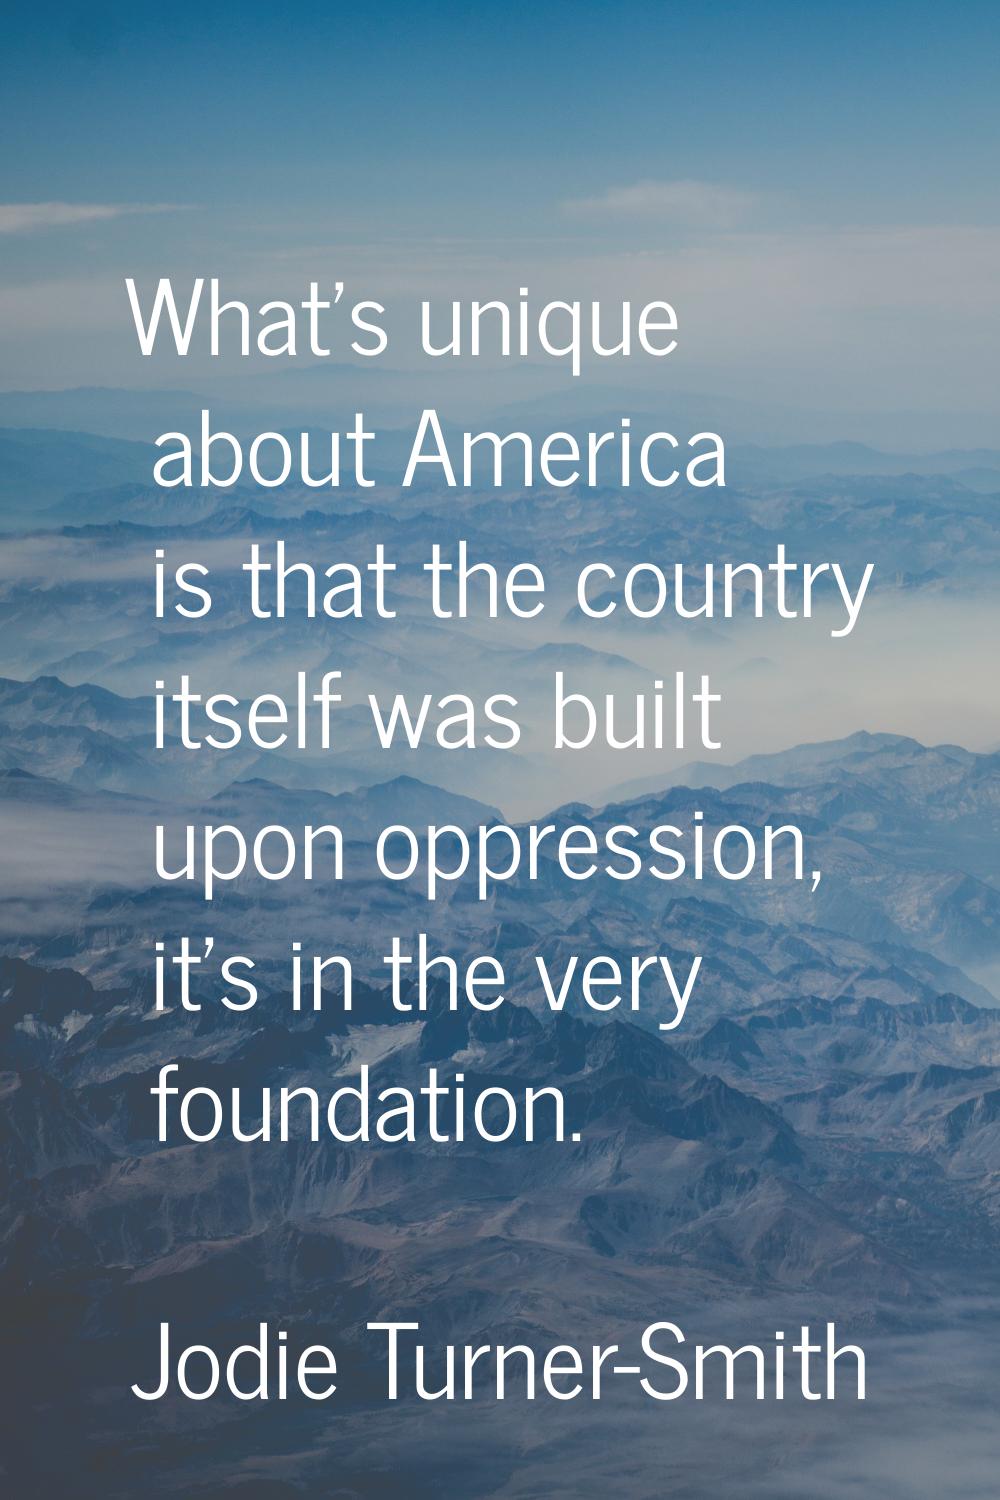 What's unique about America is that the country itself was built upon oppression, it's in the very 